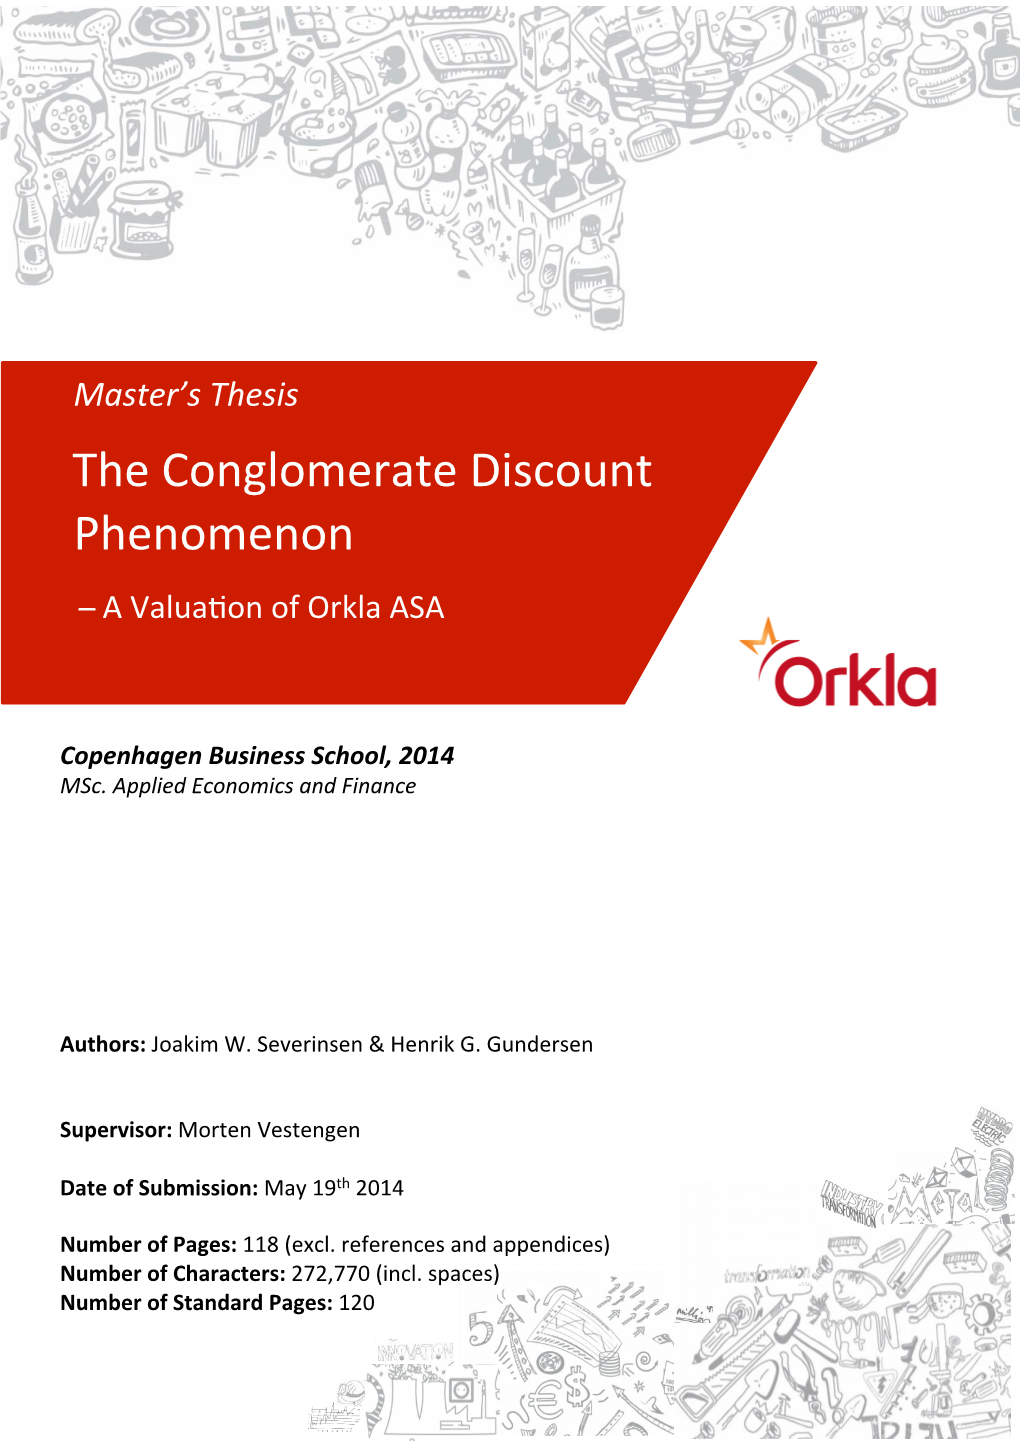 A Valuation of Orkla